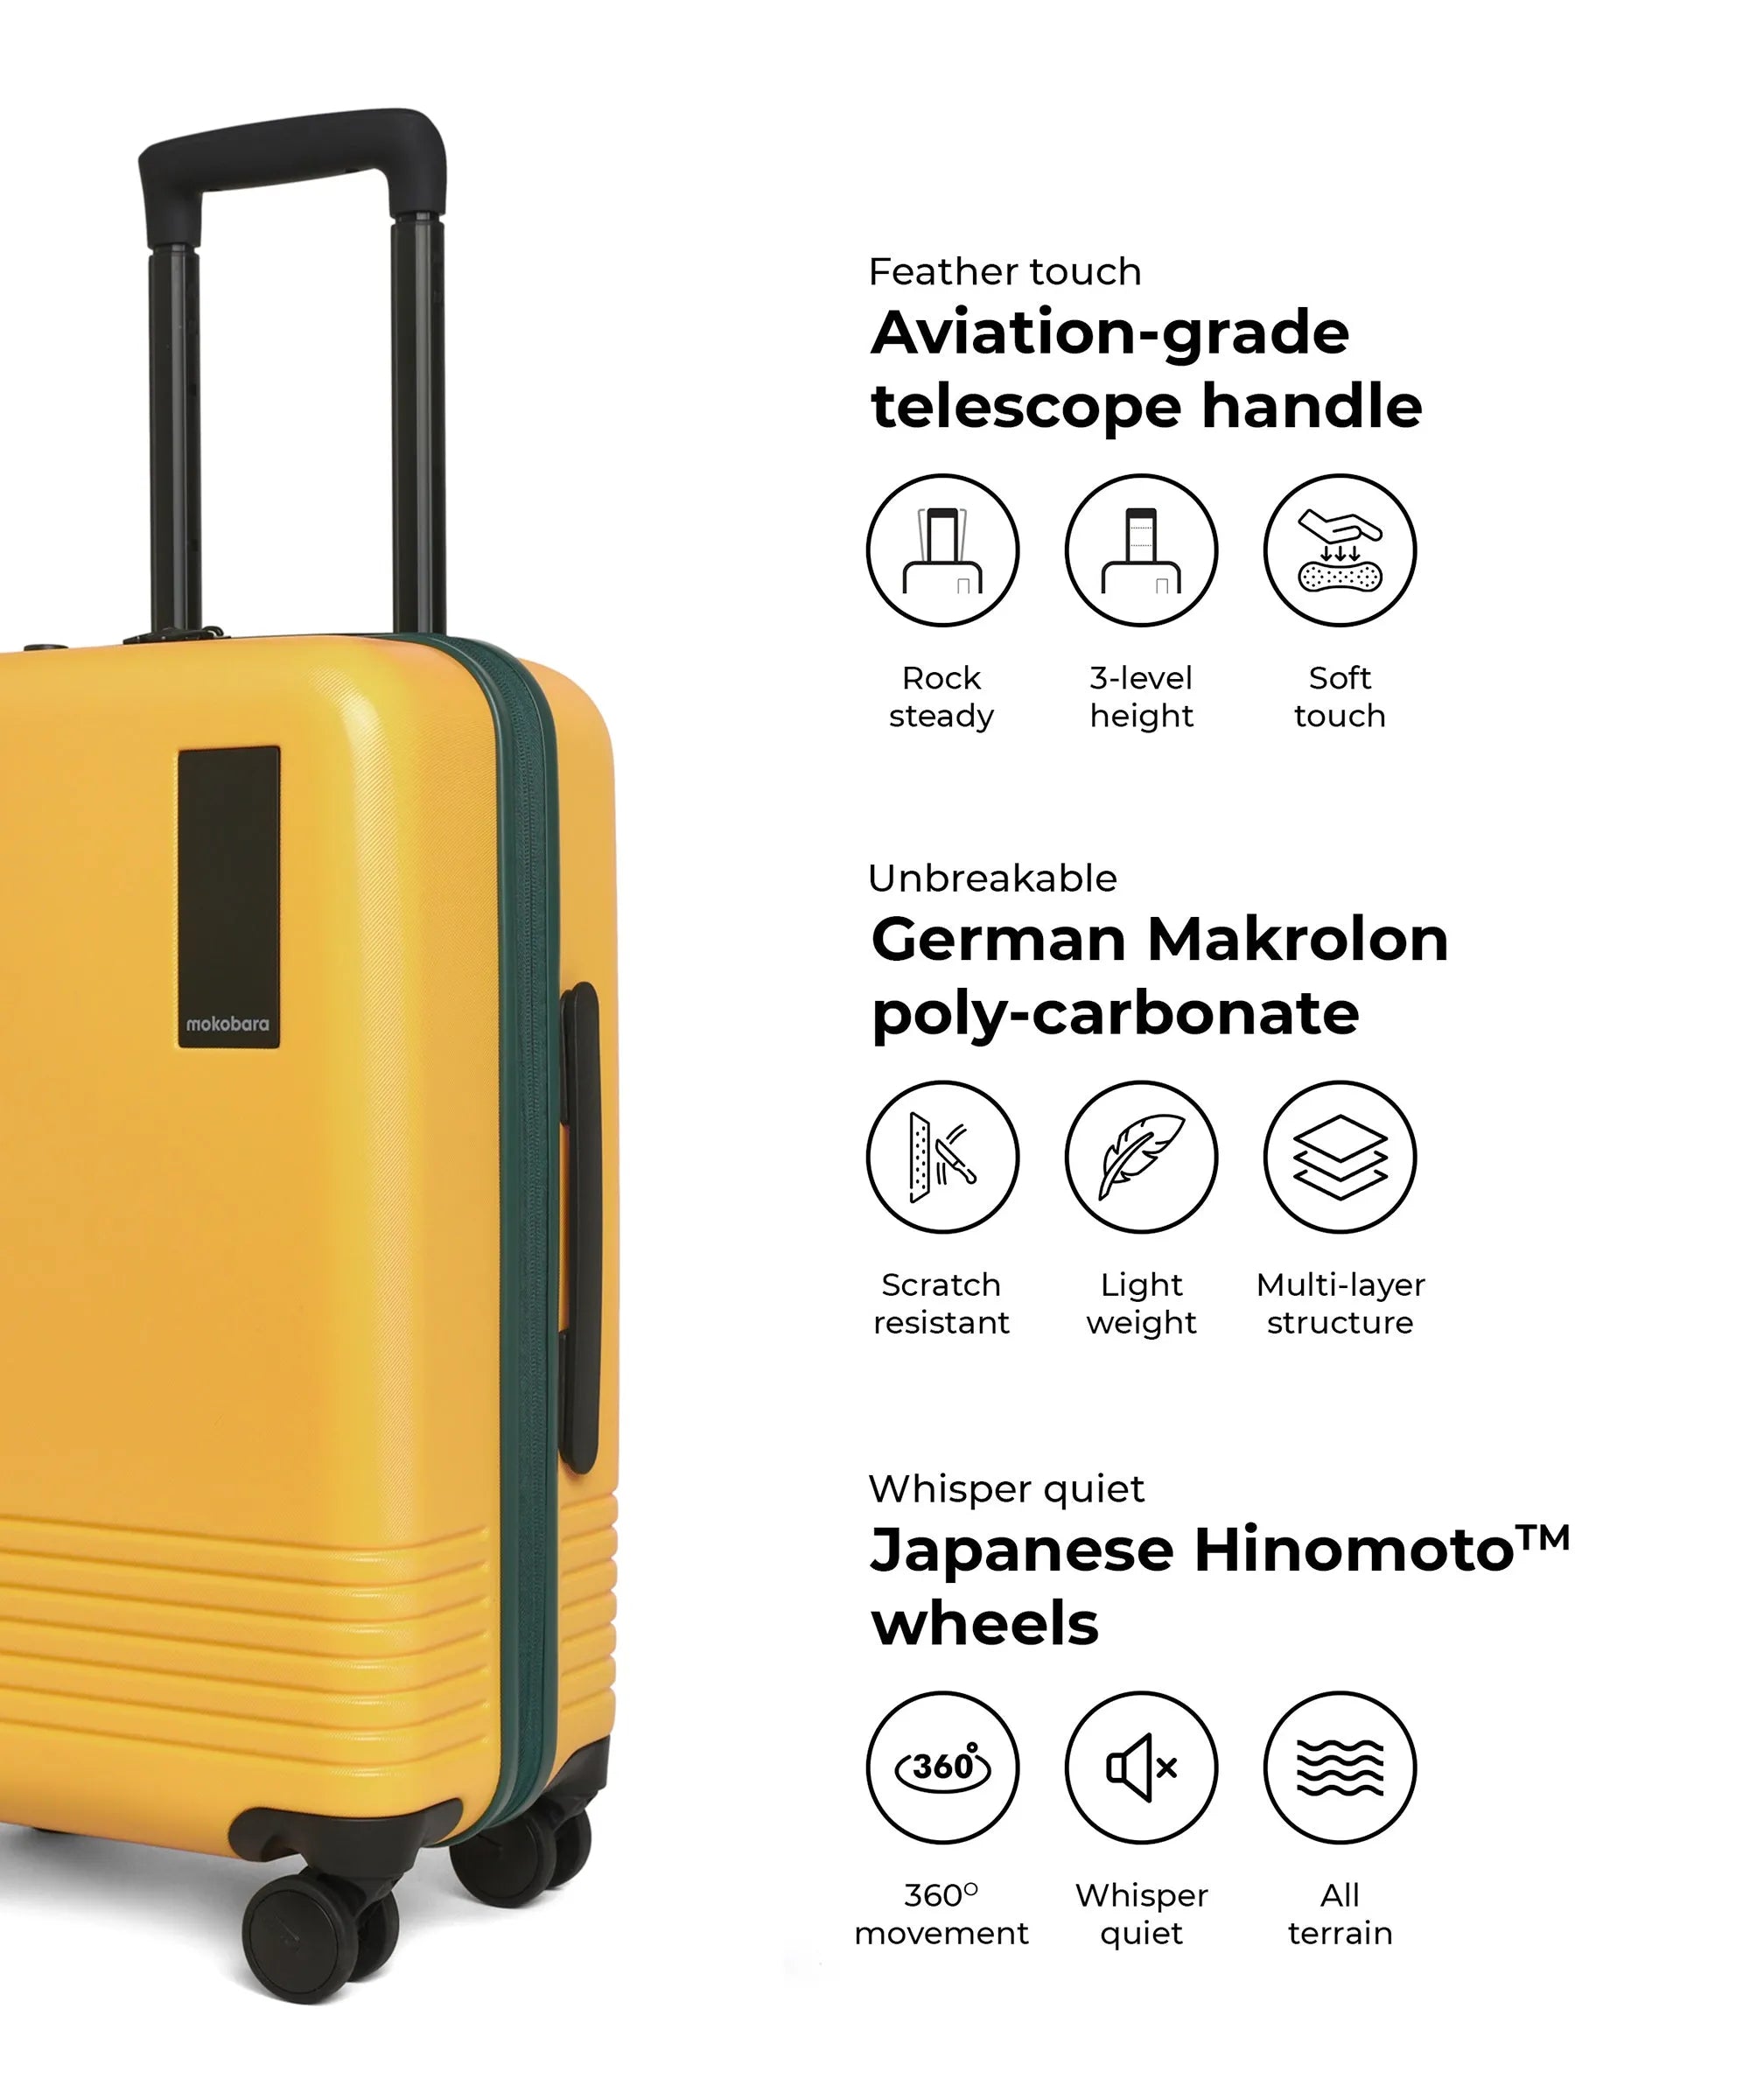 Color_Summer Greenray (Limited Edition) | The Cabin Luggage